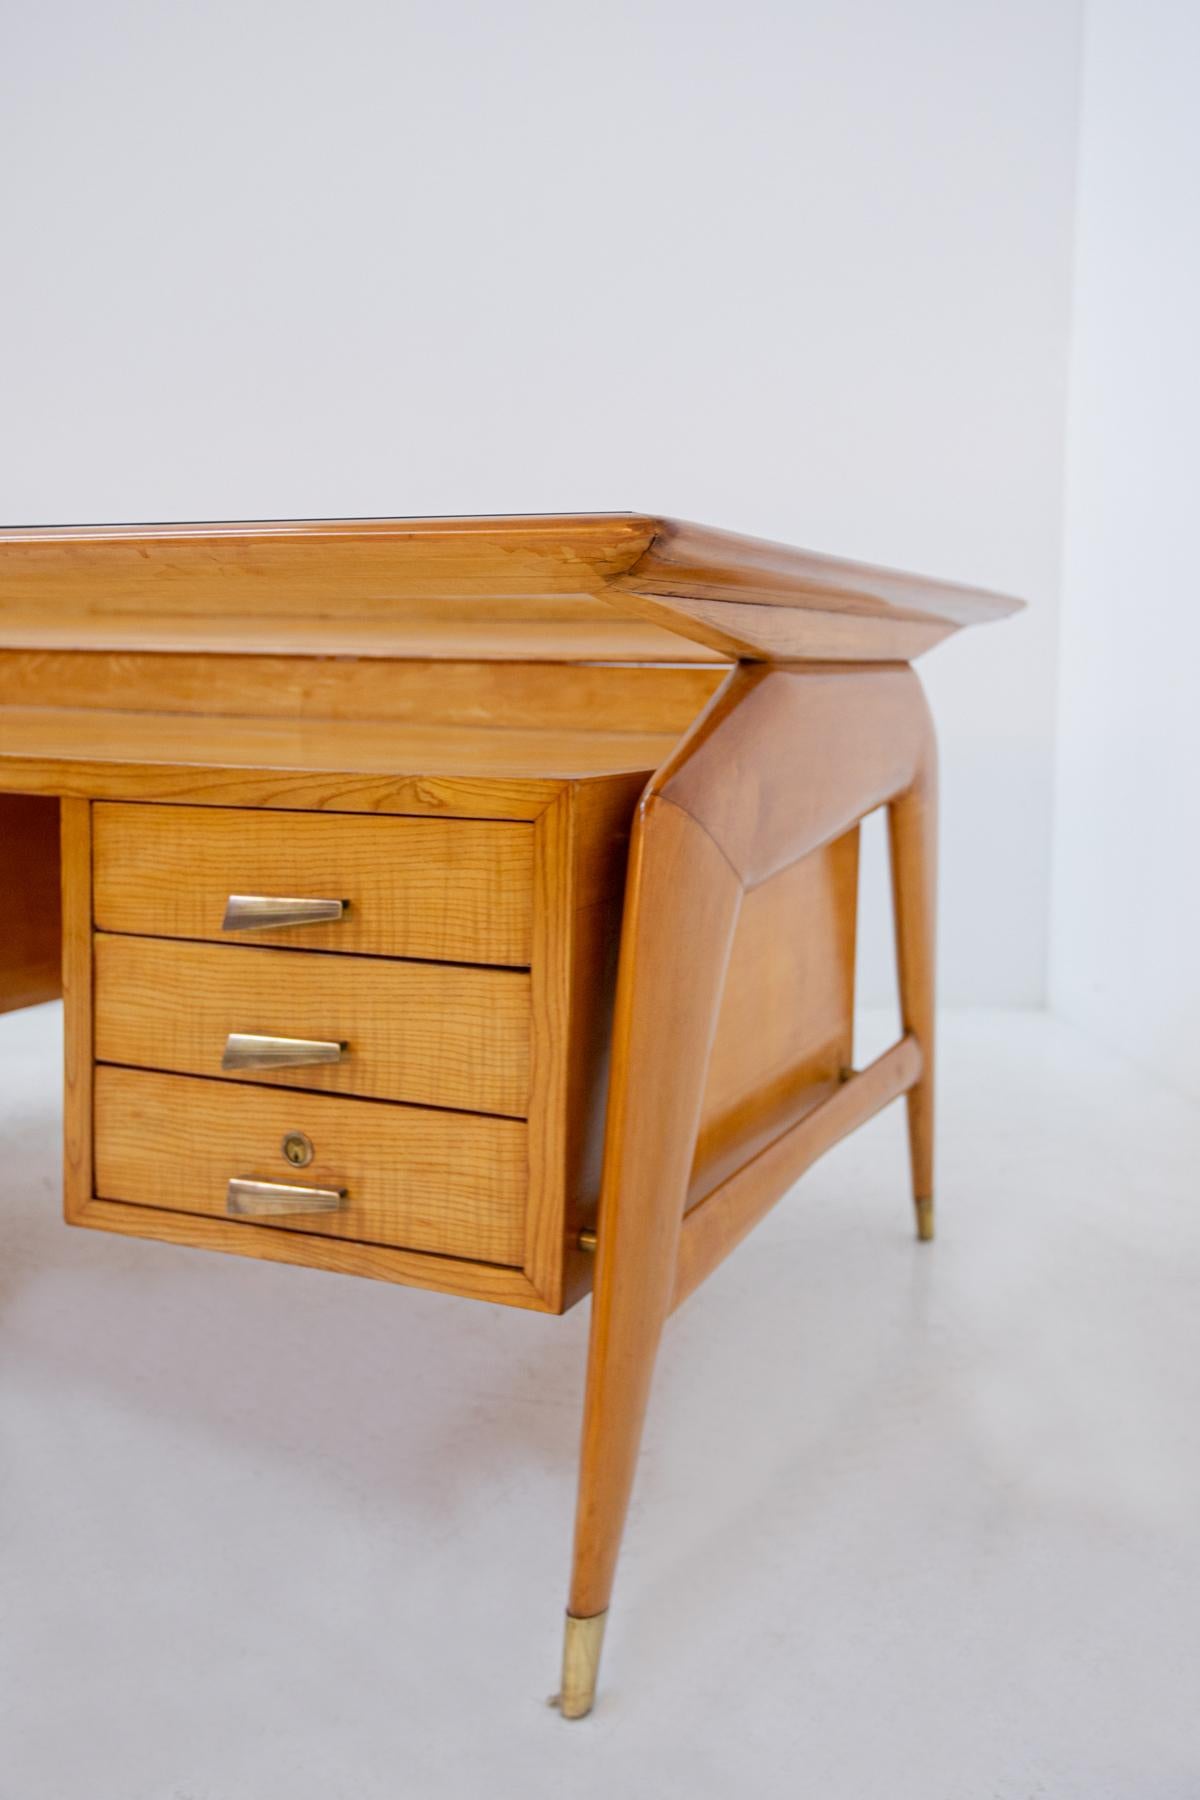 Carlo de Carli Important Desk in Wood Glass and Brass, 1950s Published 10